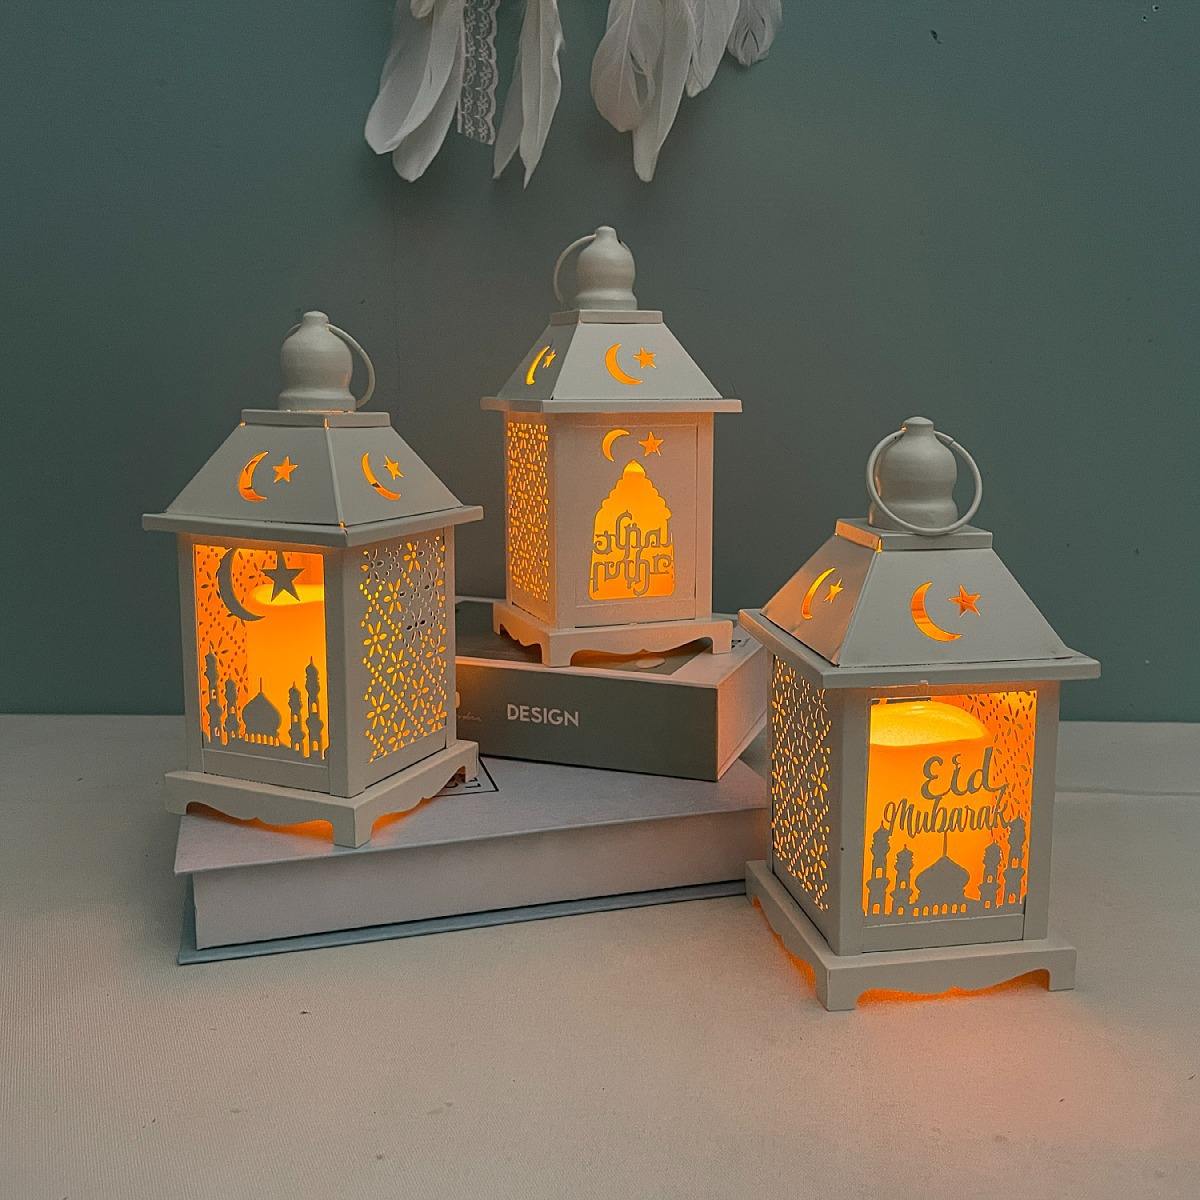 Outdoor Waterproof White Moroccan Style Candle Lantern for Wedding Events Parties Decorative